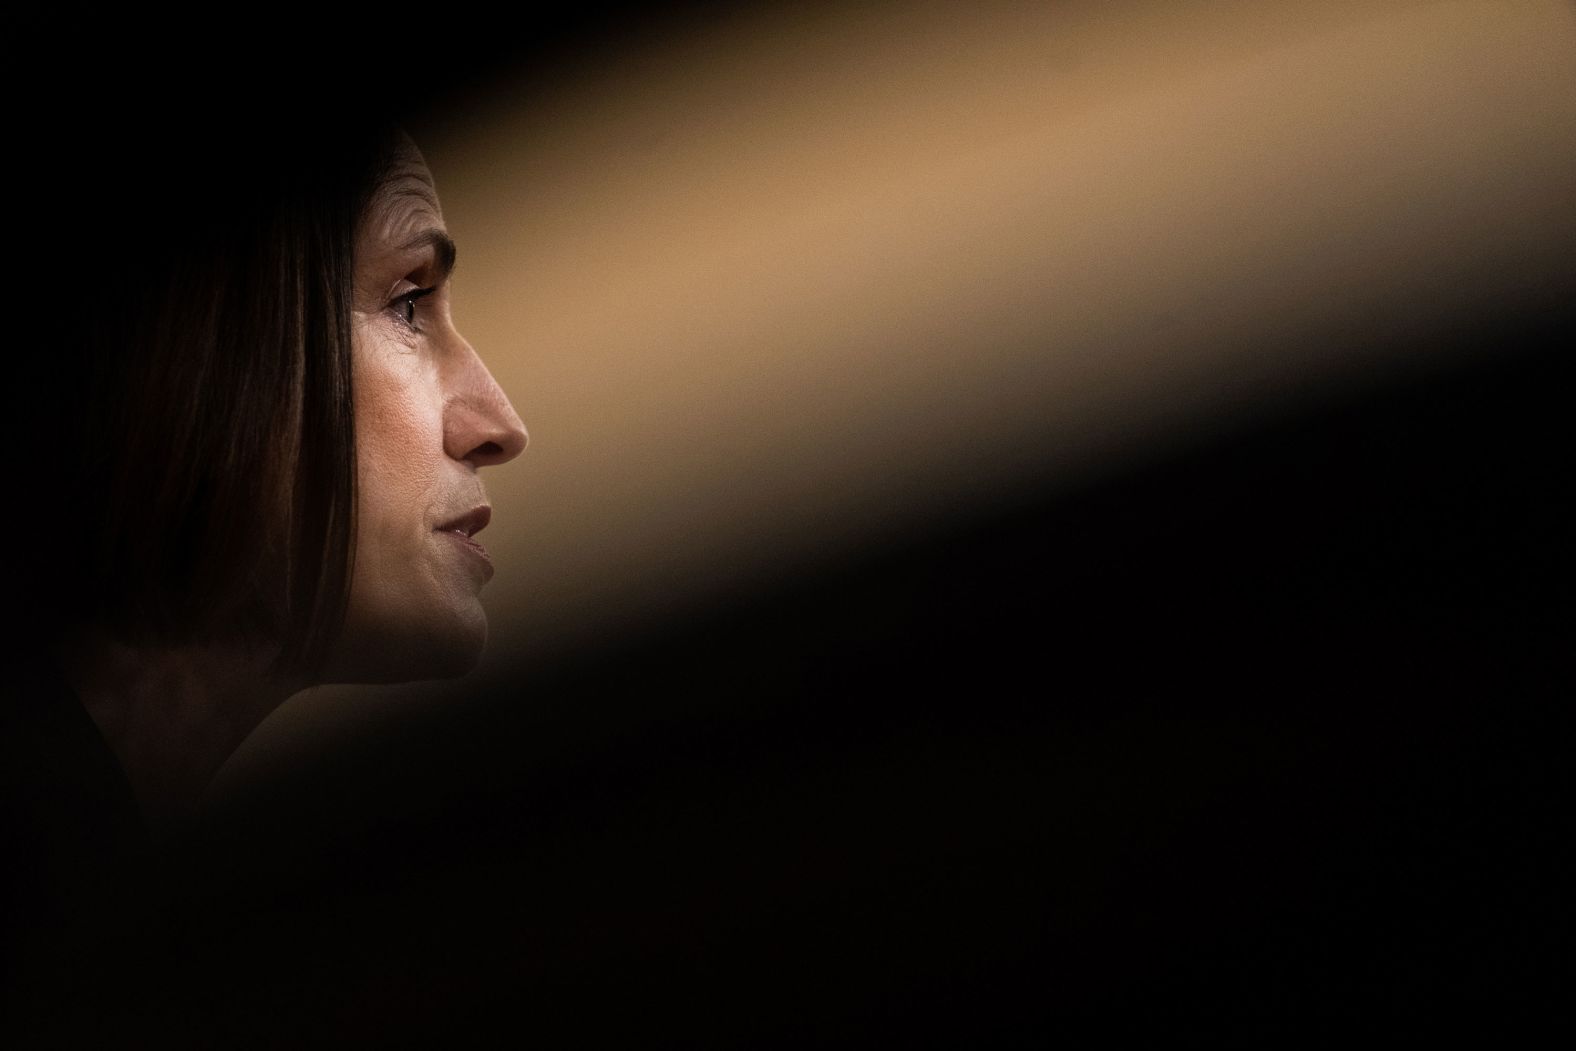 Fiona Hill, Trump's former adviser on Russia and Europe, testifies before the House Intelligence Committee on November 21. <a href="https://www.cnn.com/2019/11/21/politics/fiona-hill-david-holmes-public-impeachment-hearing/index.html" target="_blank">Over five days of public testimony,</a> multiple witnesses testified that the investigations into Trump's political opponents were conditioned on a White House meeting the Ukrainians wanted, as well as the releasing of $400 million in security aid that had been frozen.